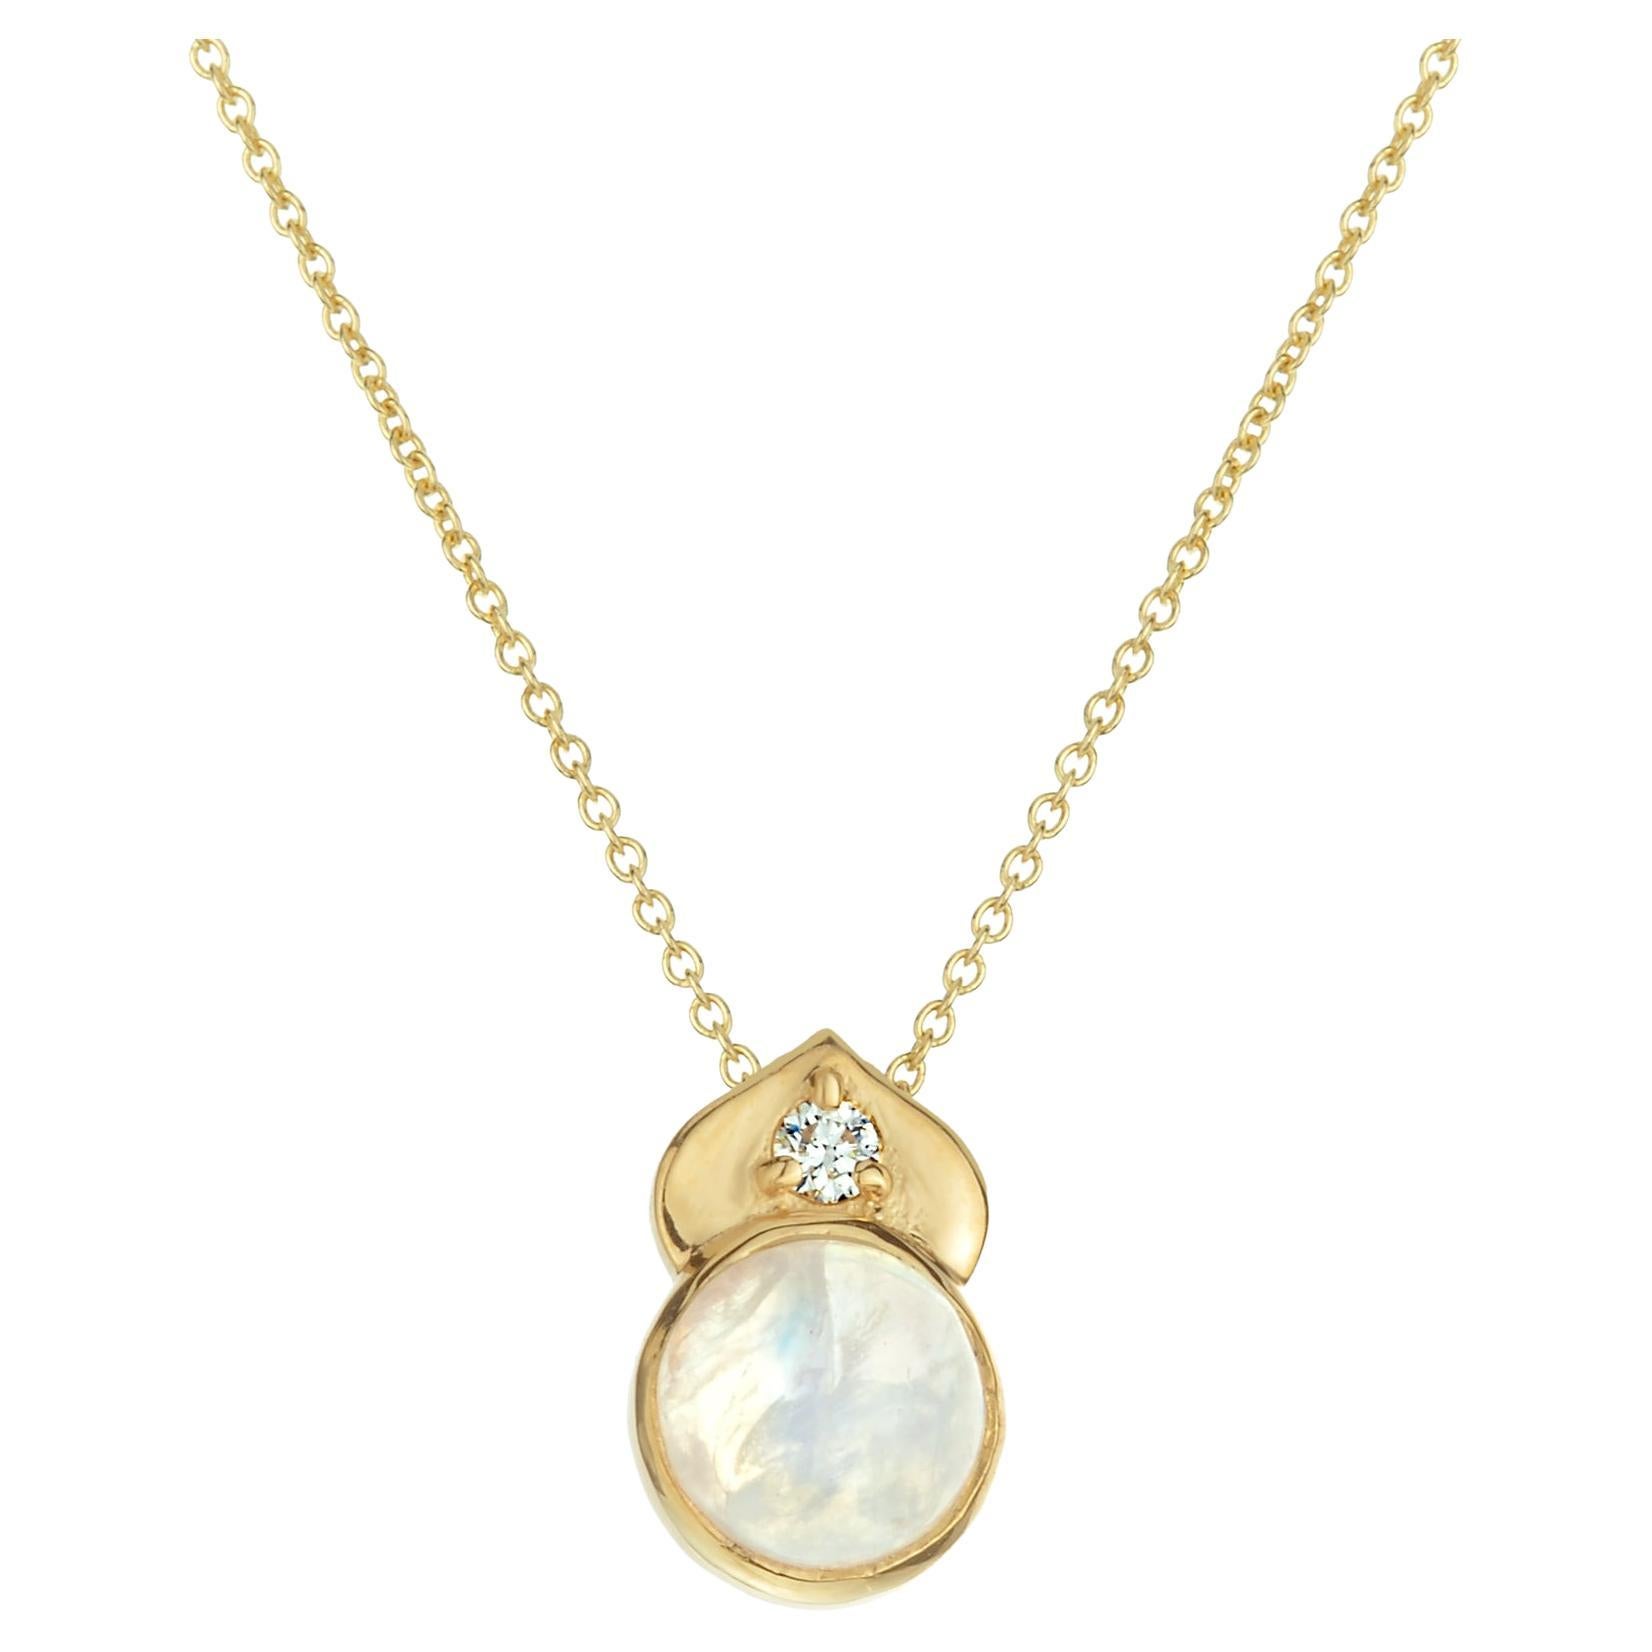 14KY Gold Moonstone and Diamond Pendant Necklace